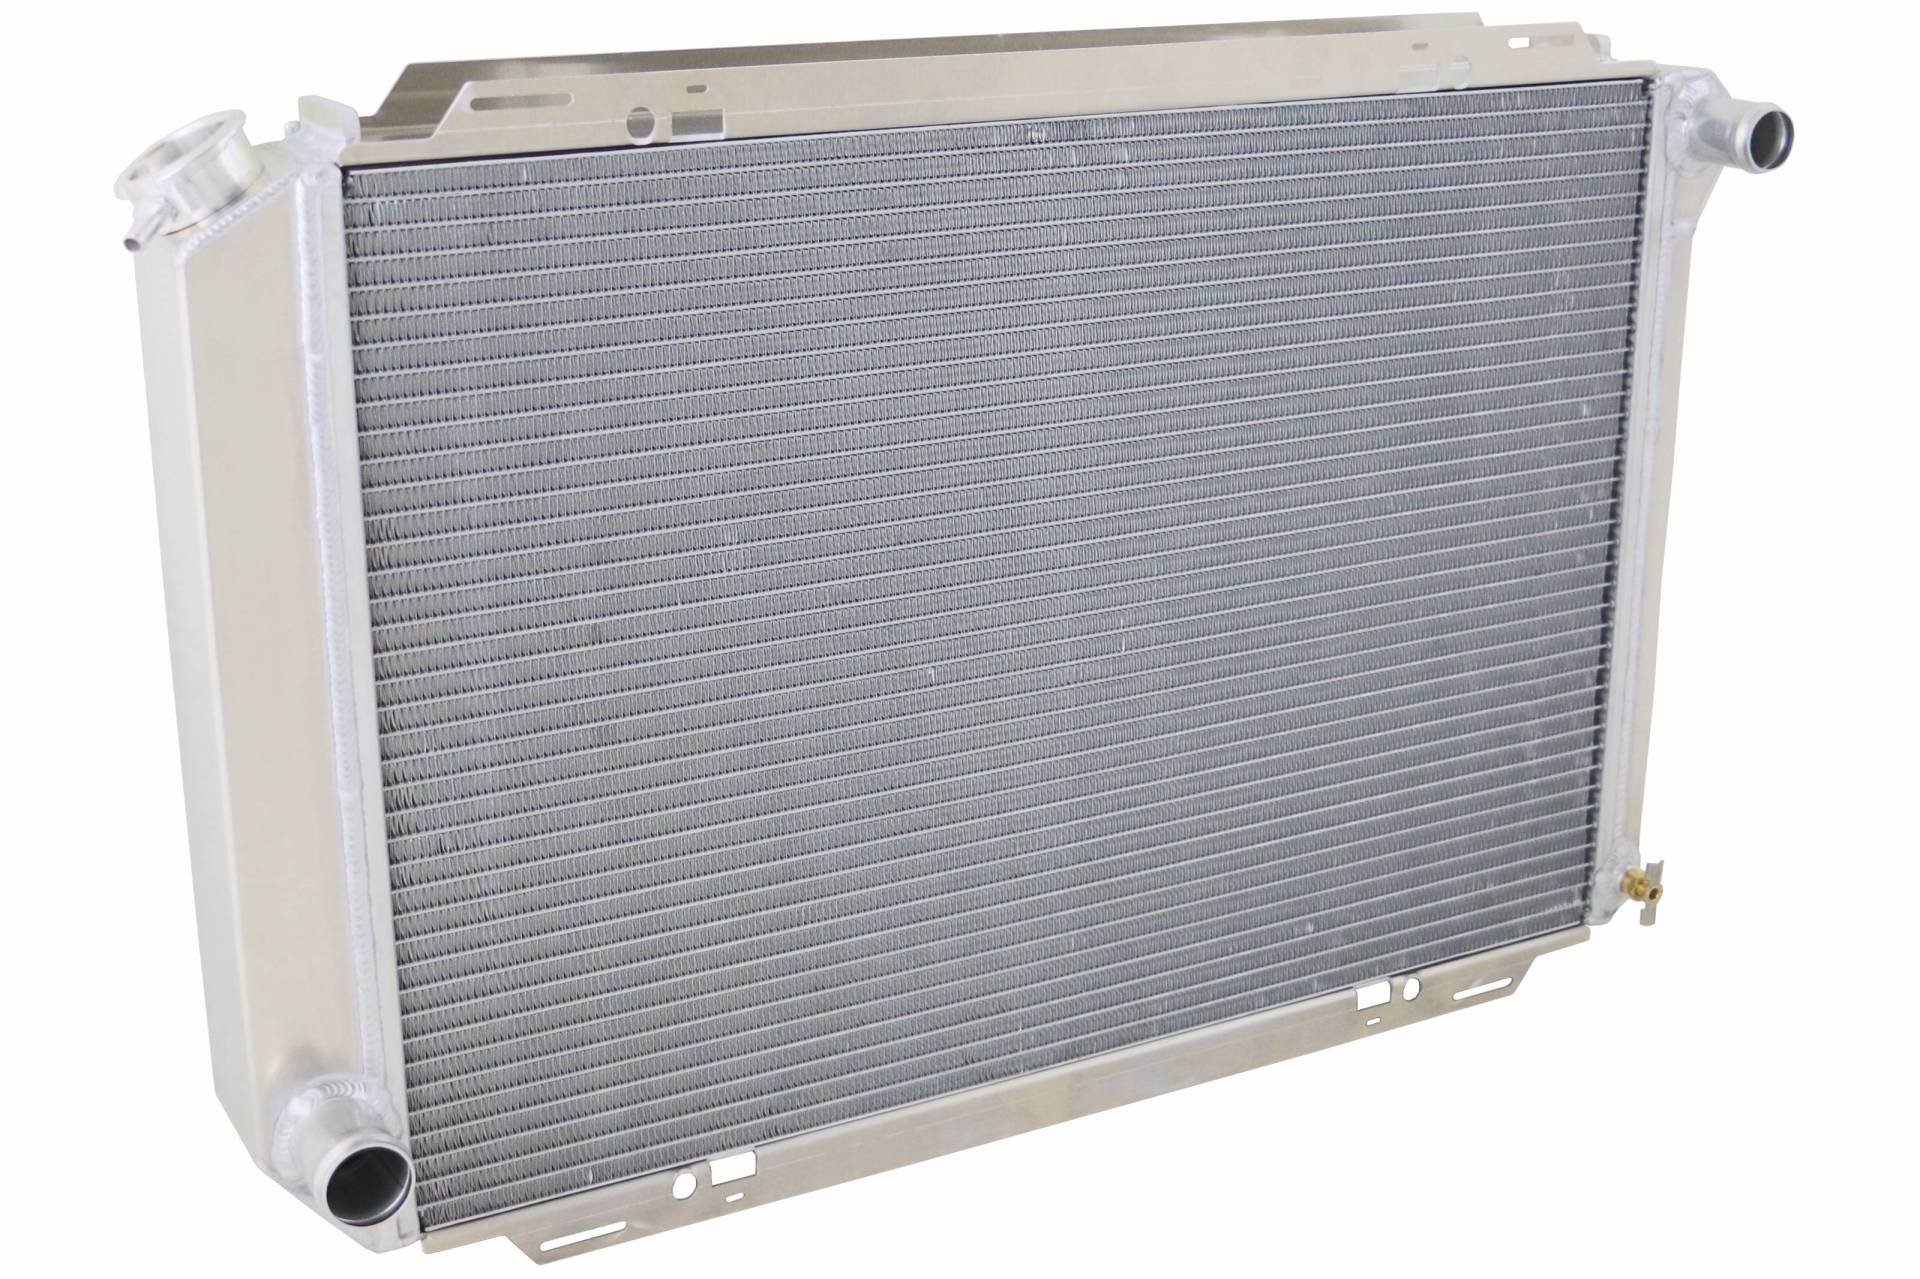 Wizard Cooling Inc - Wizard Cooling - 1980-1993 Ford Mustang Aluminum Radiator - 556-100